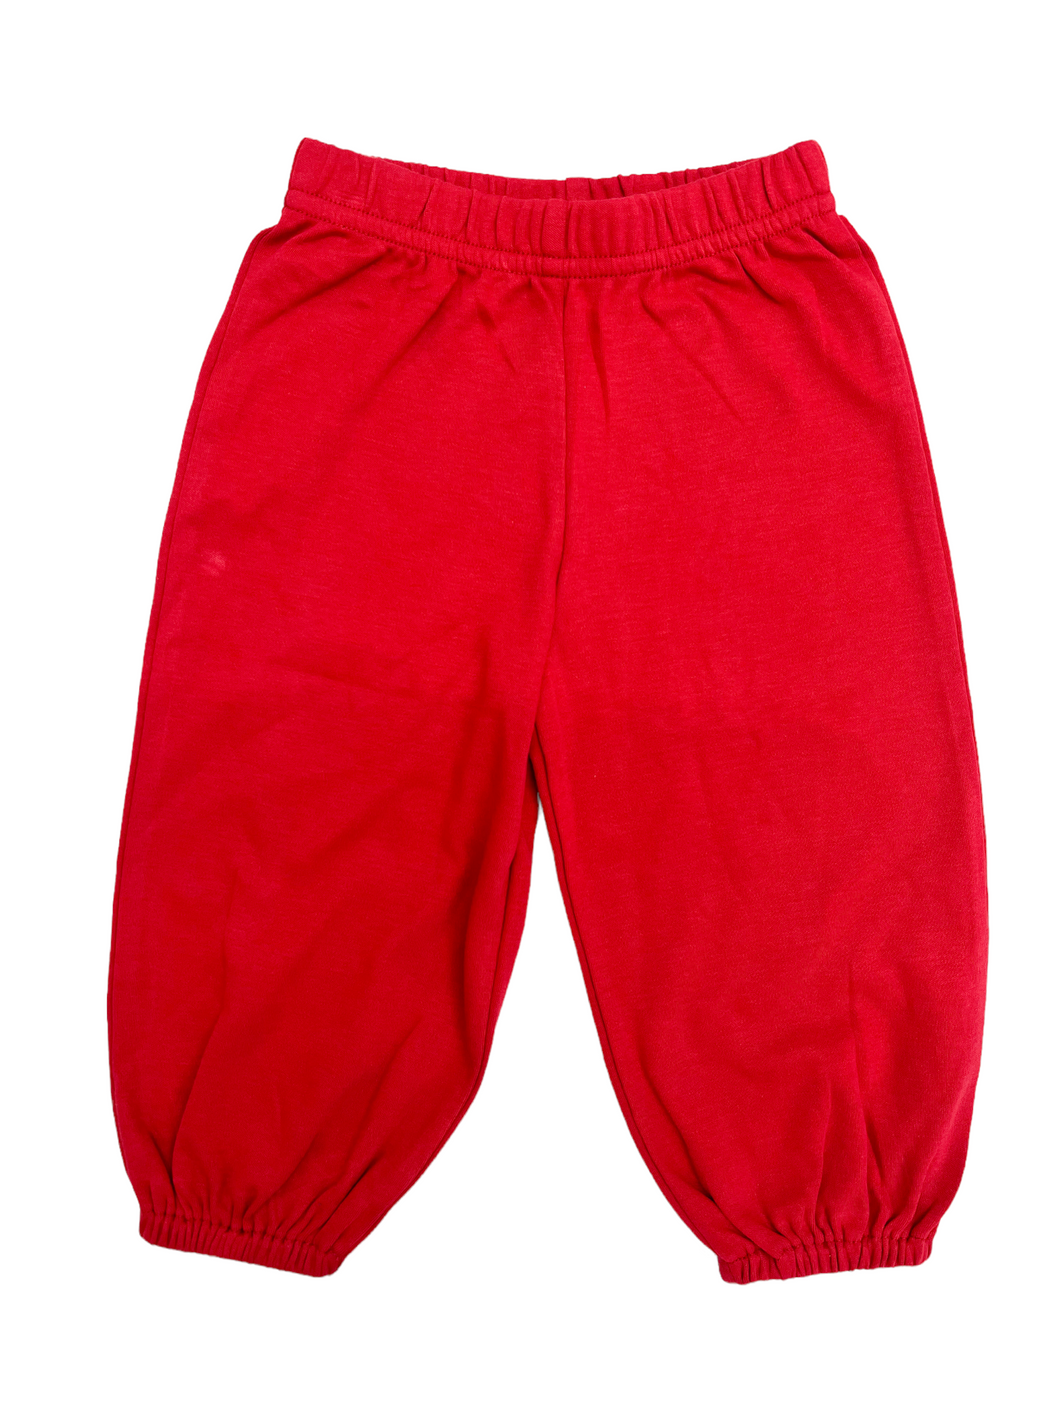 Red Knit Bloomer Pant